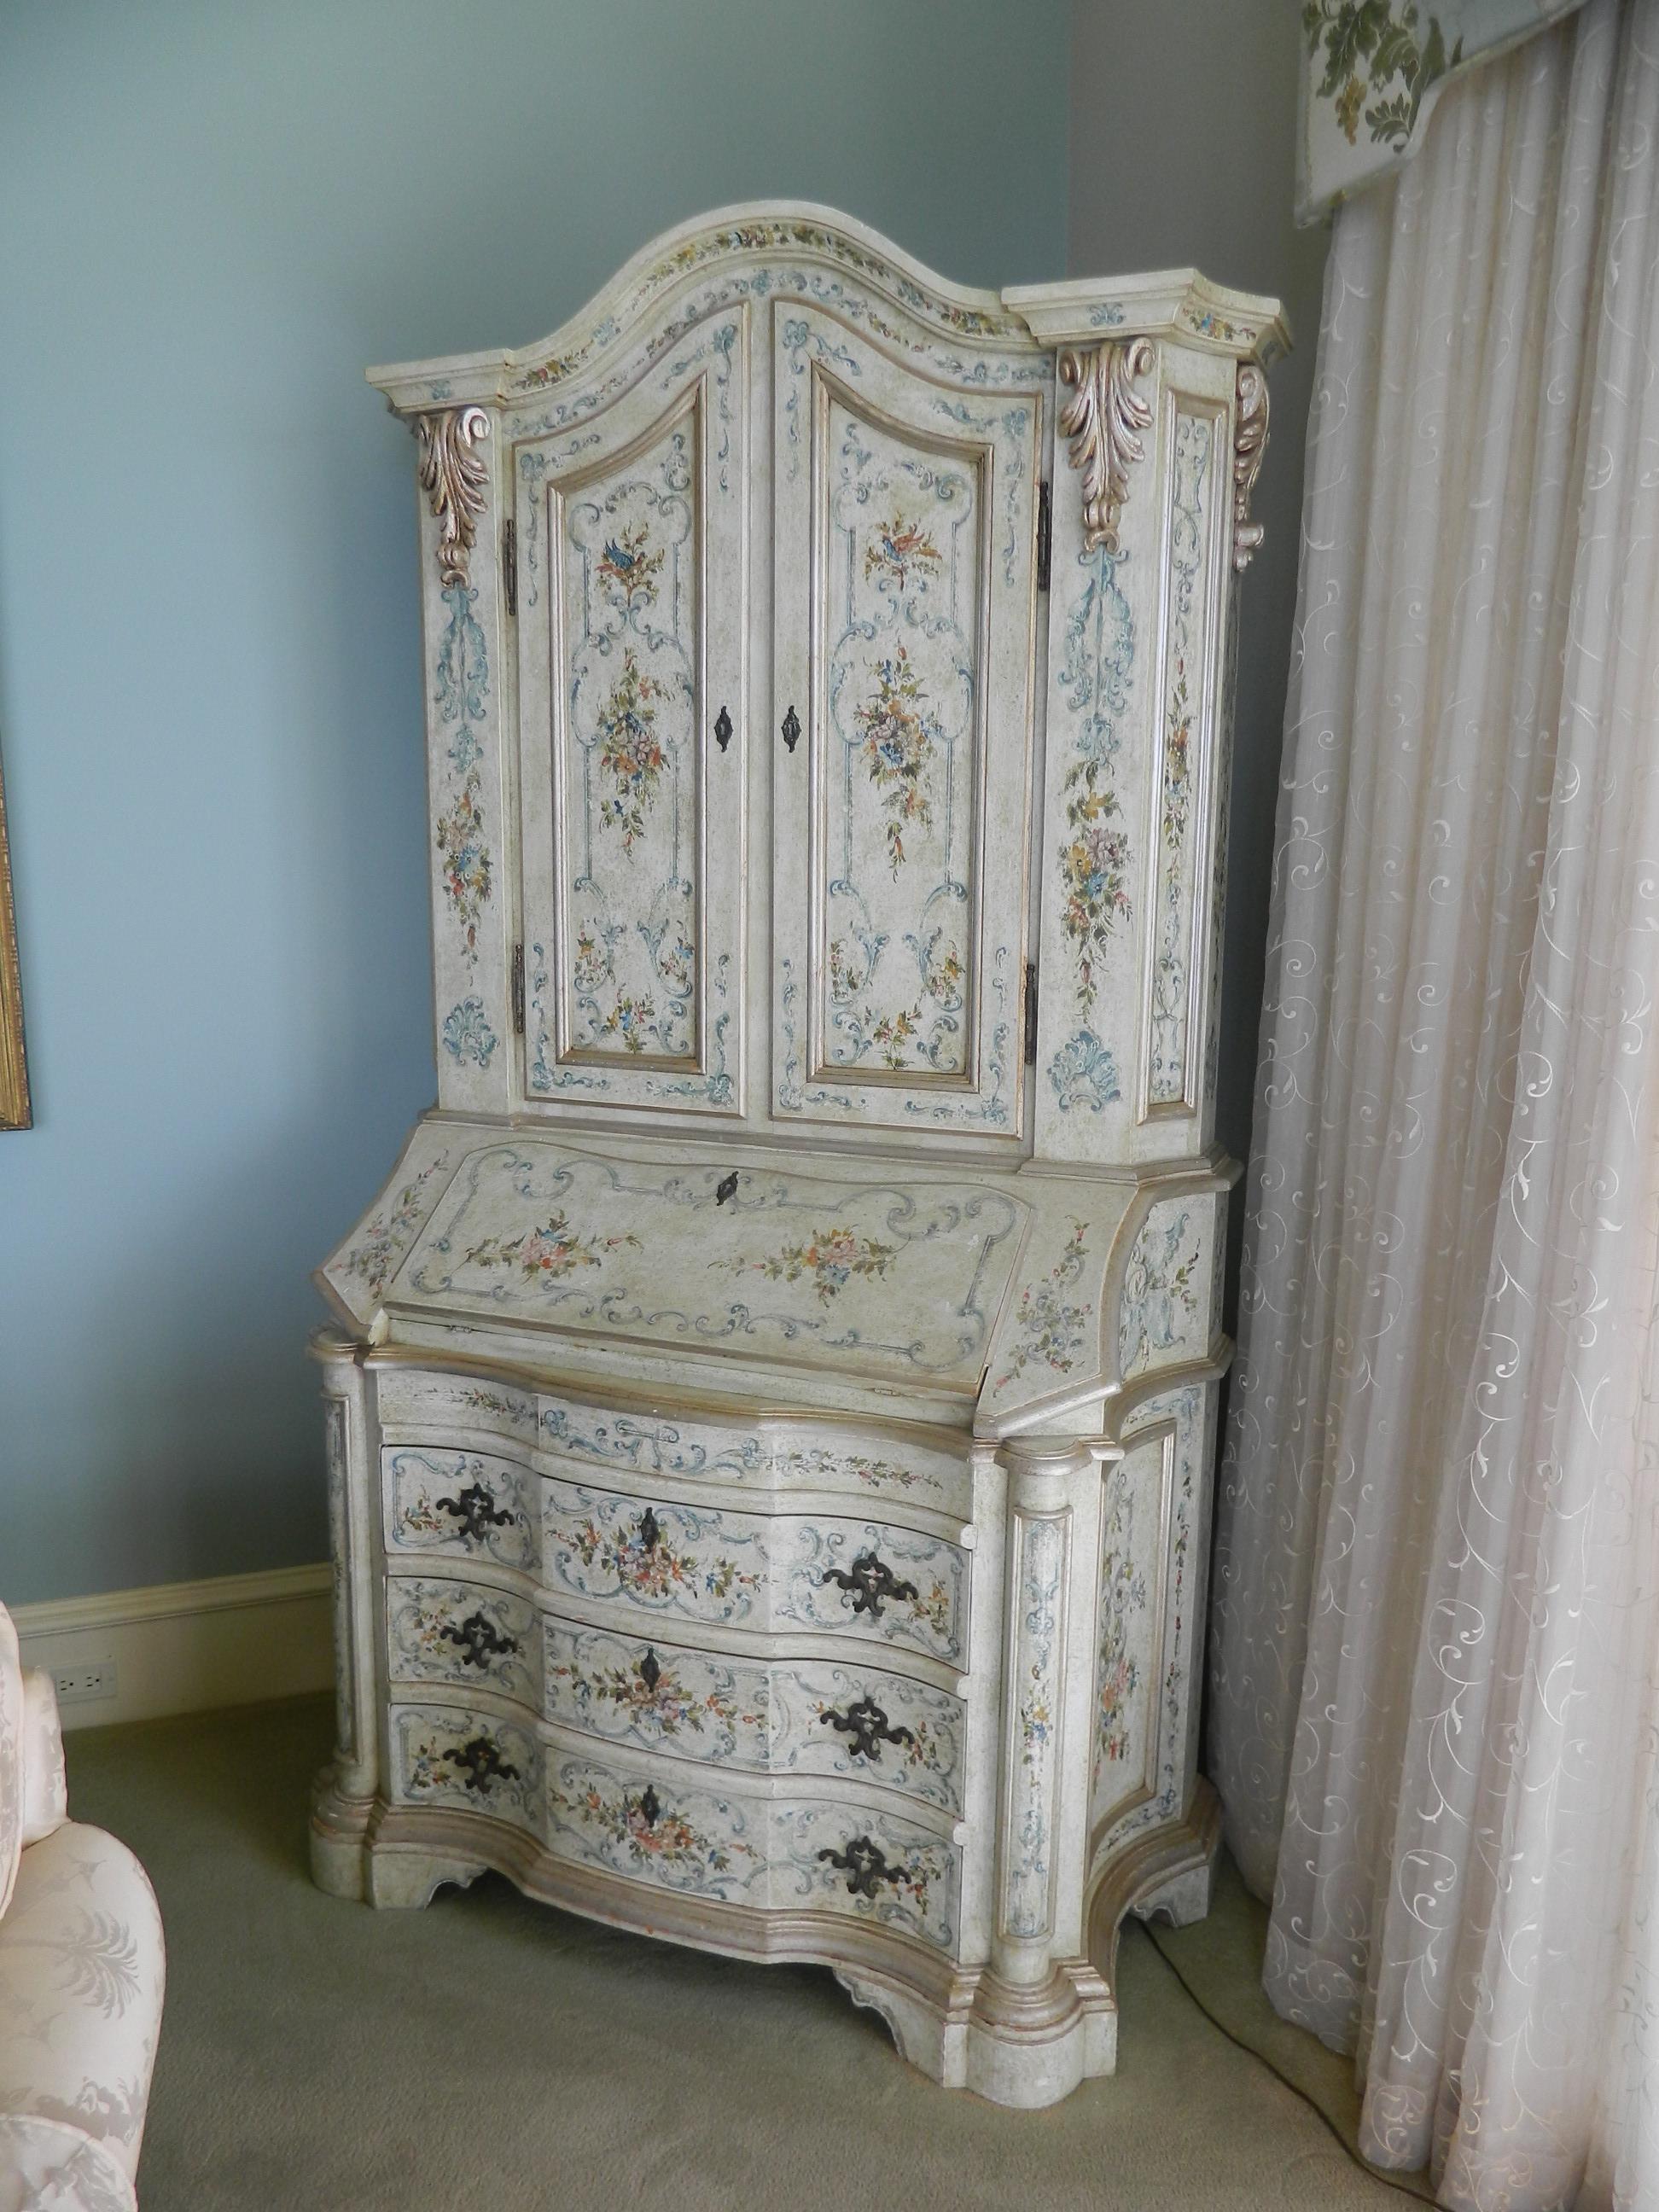 Mid-20th century Italian Baroque style painted secretary with display cabinet, pull-out desk and three drawers. Decorative items inside cabinet are not included.